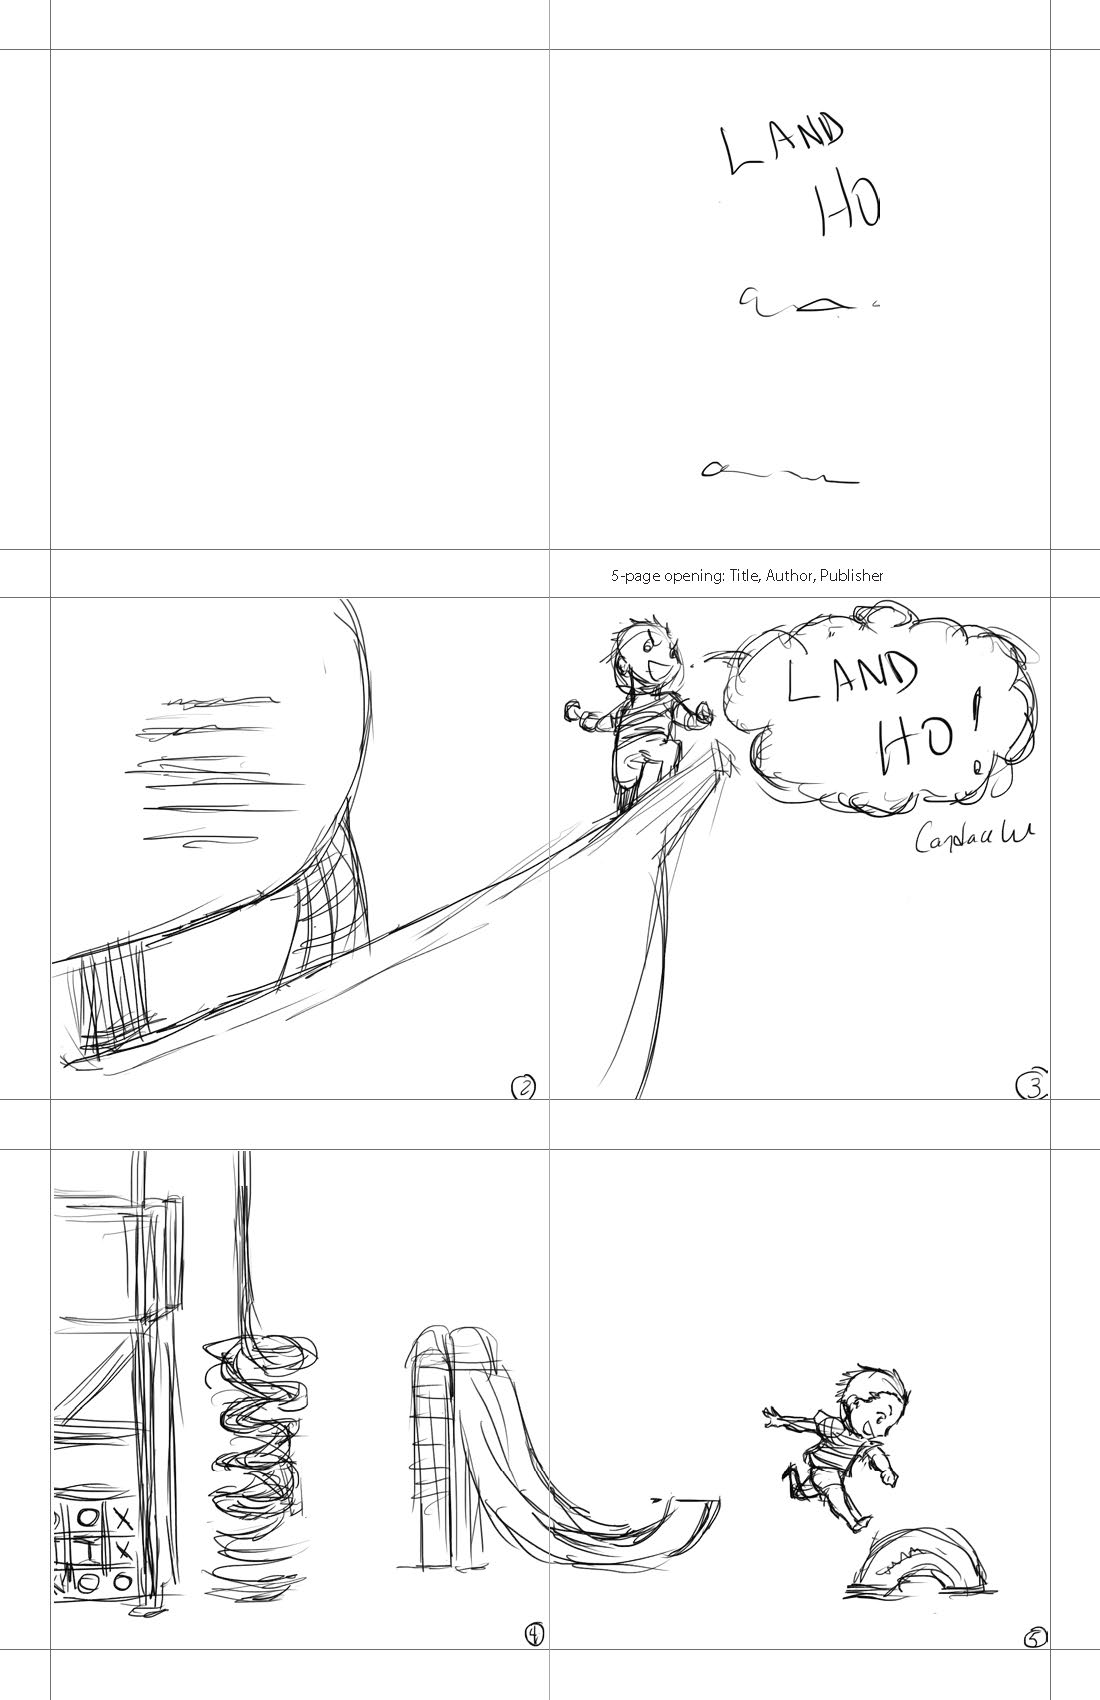 MAKE IT BLUE story layouts PRINT REVISIONS small_Page_1.jpg